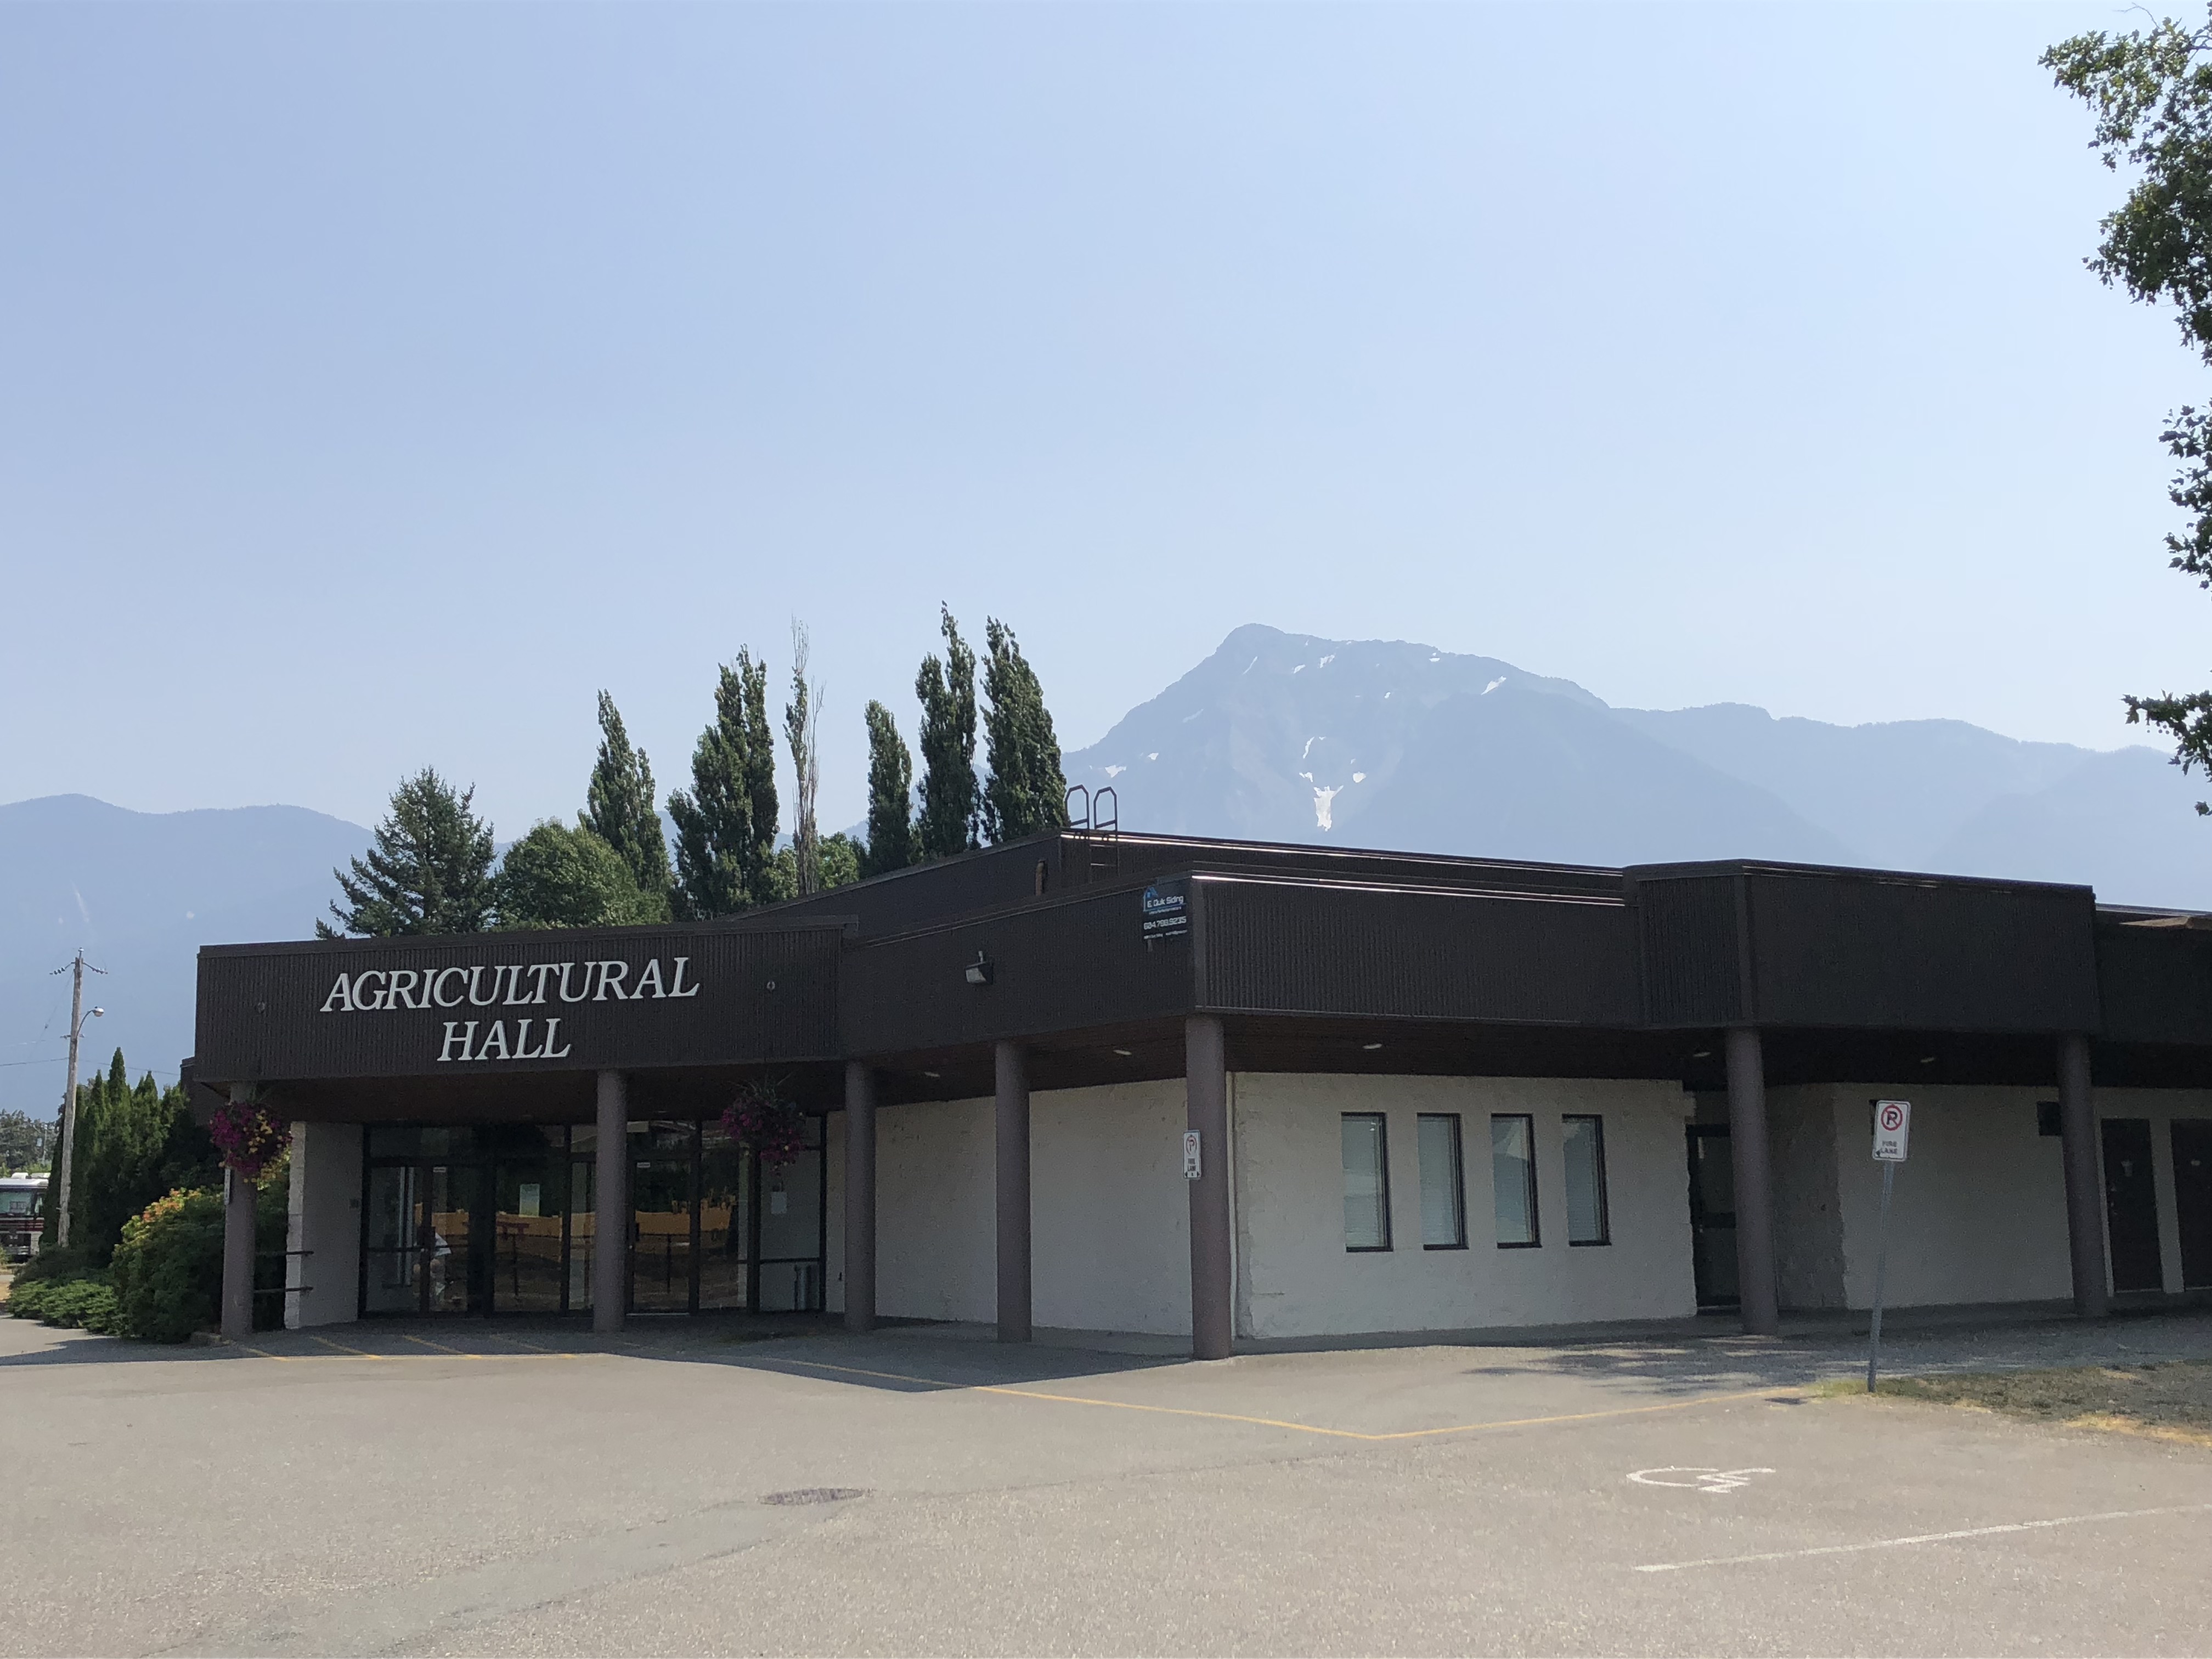 Colour photograph of the Agricultural Hall building and parking lot.